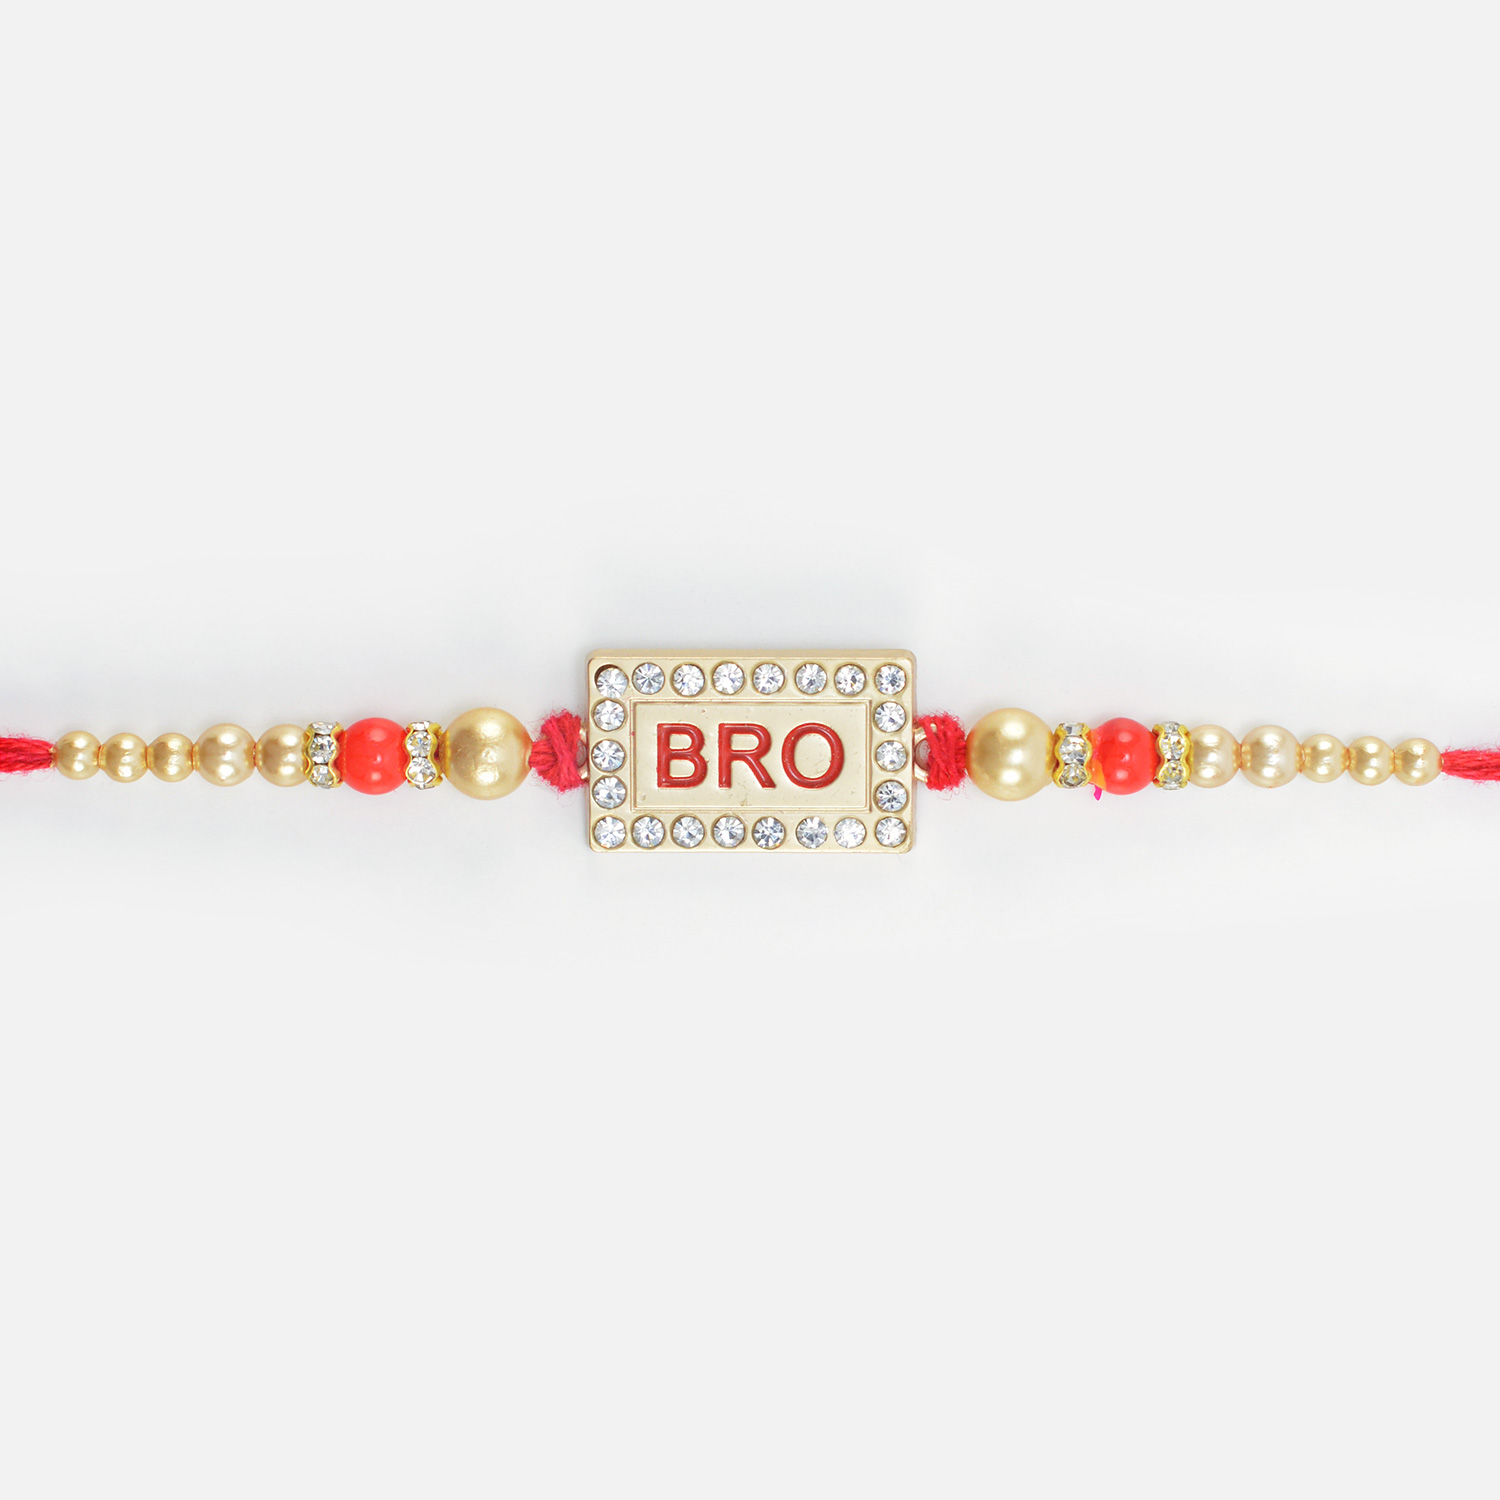 Rectangle Shape Bro Written Jewel and Colorful Beads Design er Rakhi for Brother